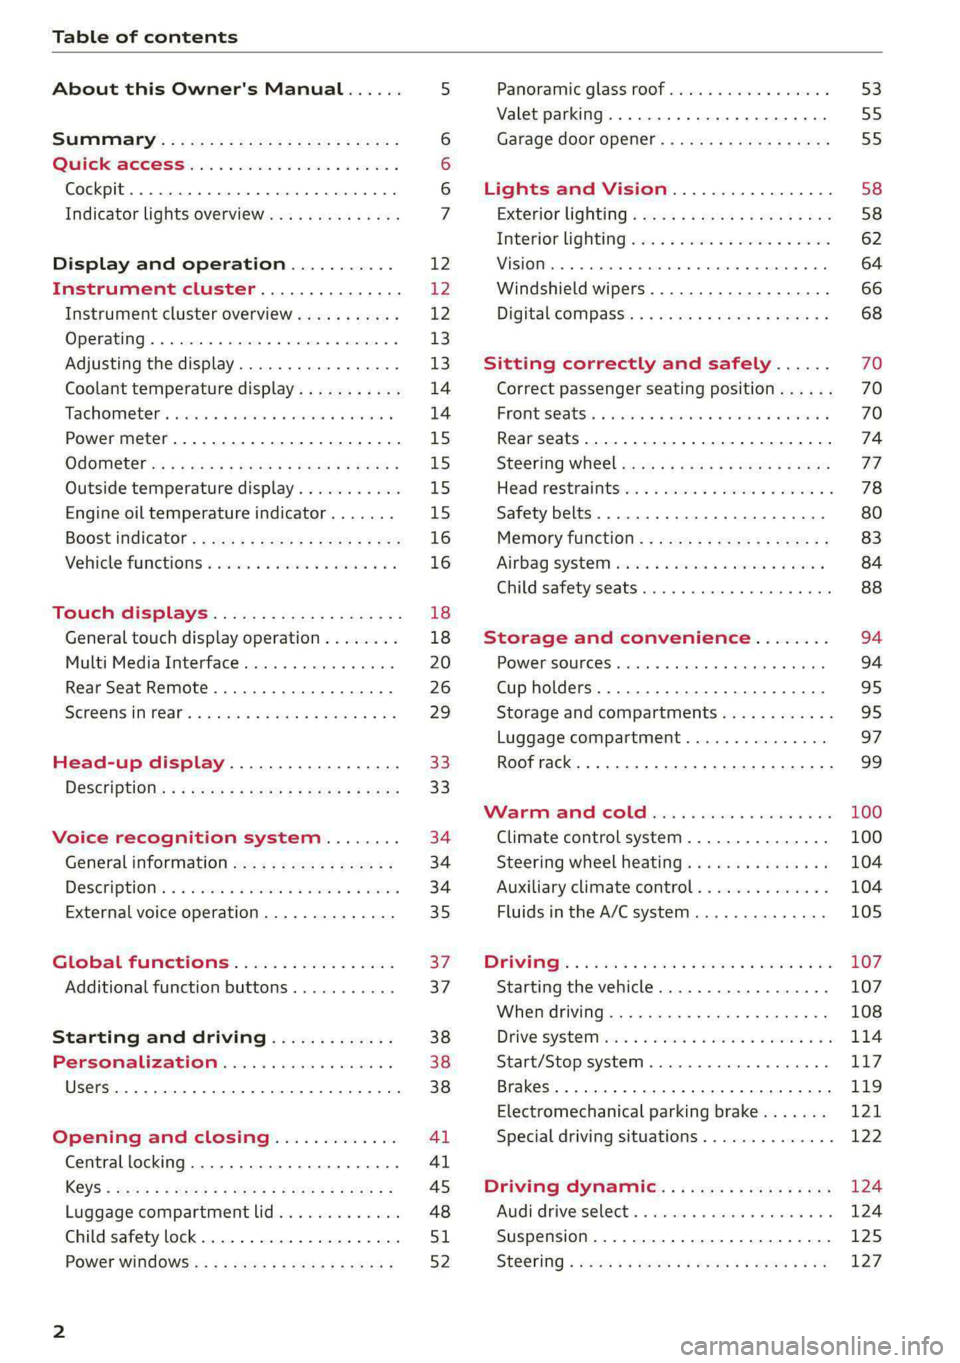 AUDI A8 2021  Owners Manual Table of contents 
  
About this Owner's Manual...... 
SUMIMAry: < = exe : eens: Seen cs sens 
QutckeaeCe ssh: «i esis se ois a eaves @ 
Cockpit. ...... 0... eee eee eee  eee 
Indicator lights ov